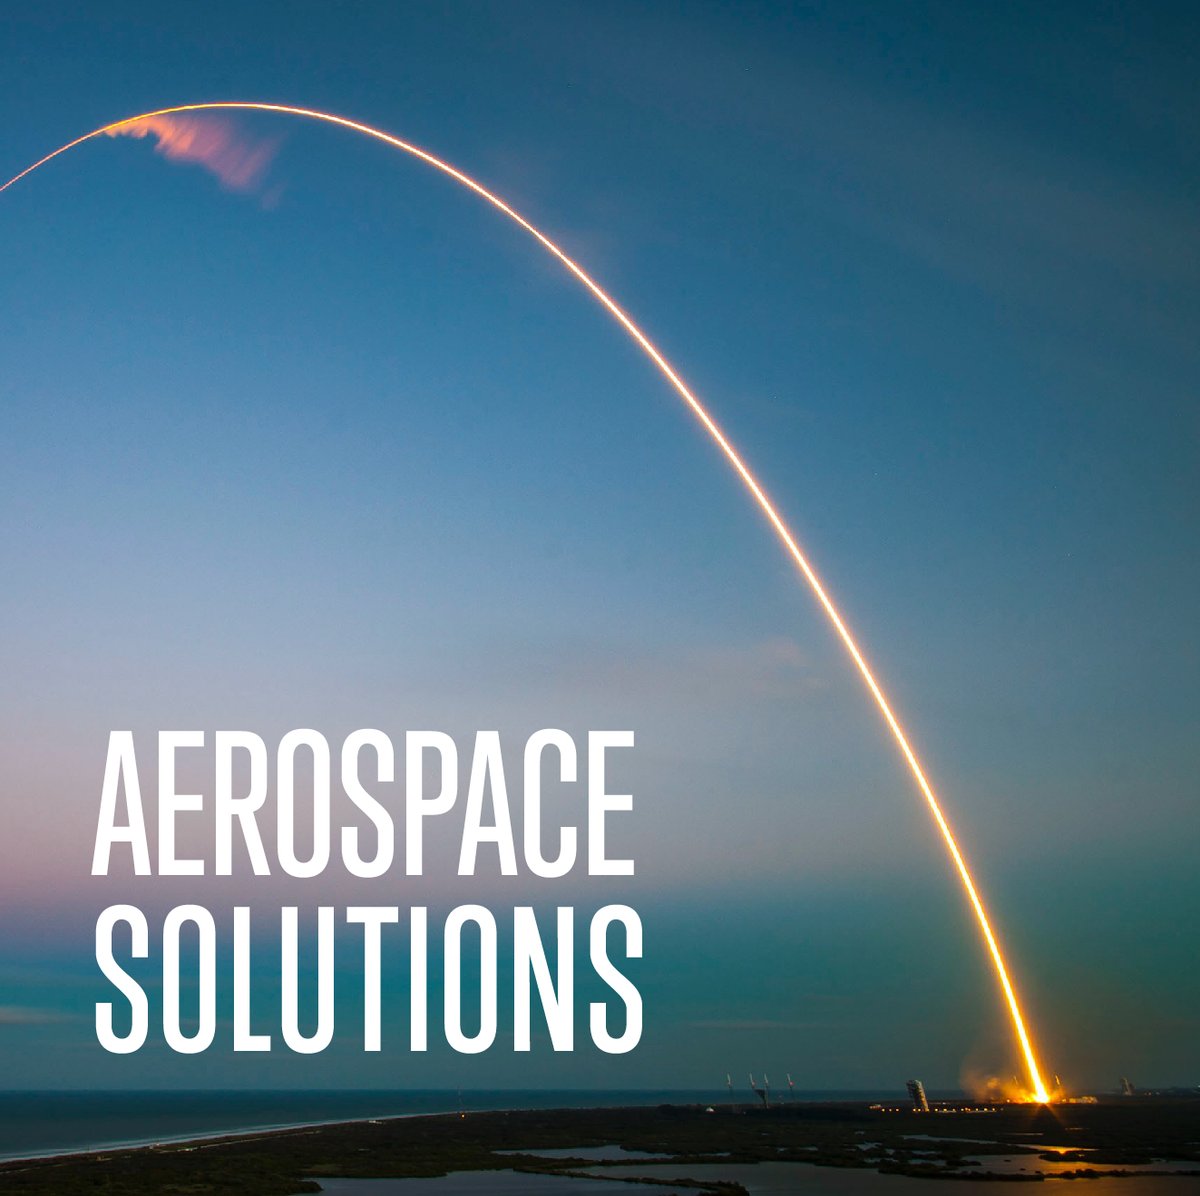 #AerospaceSolutions We have straightforward solutions that will shape the future of jet propulsion. Contact us by phone or email. We'd like to tell you about our groundbreaking equipment. swedm.com (877) 467-9336  #JetPropulsion #AerospaceTechnology